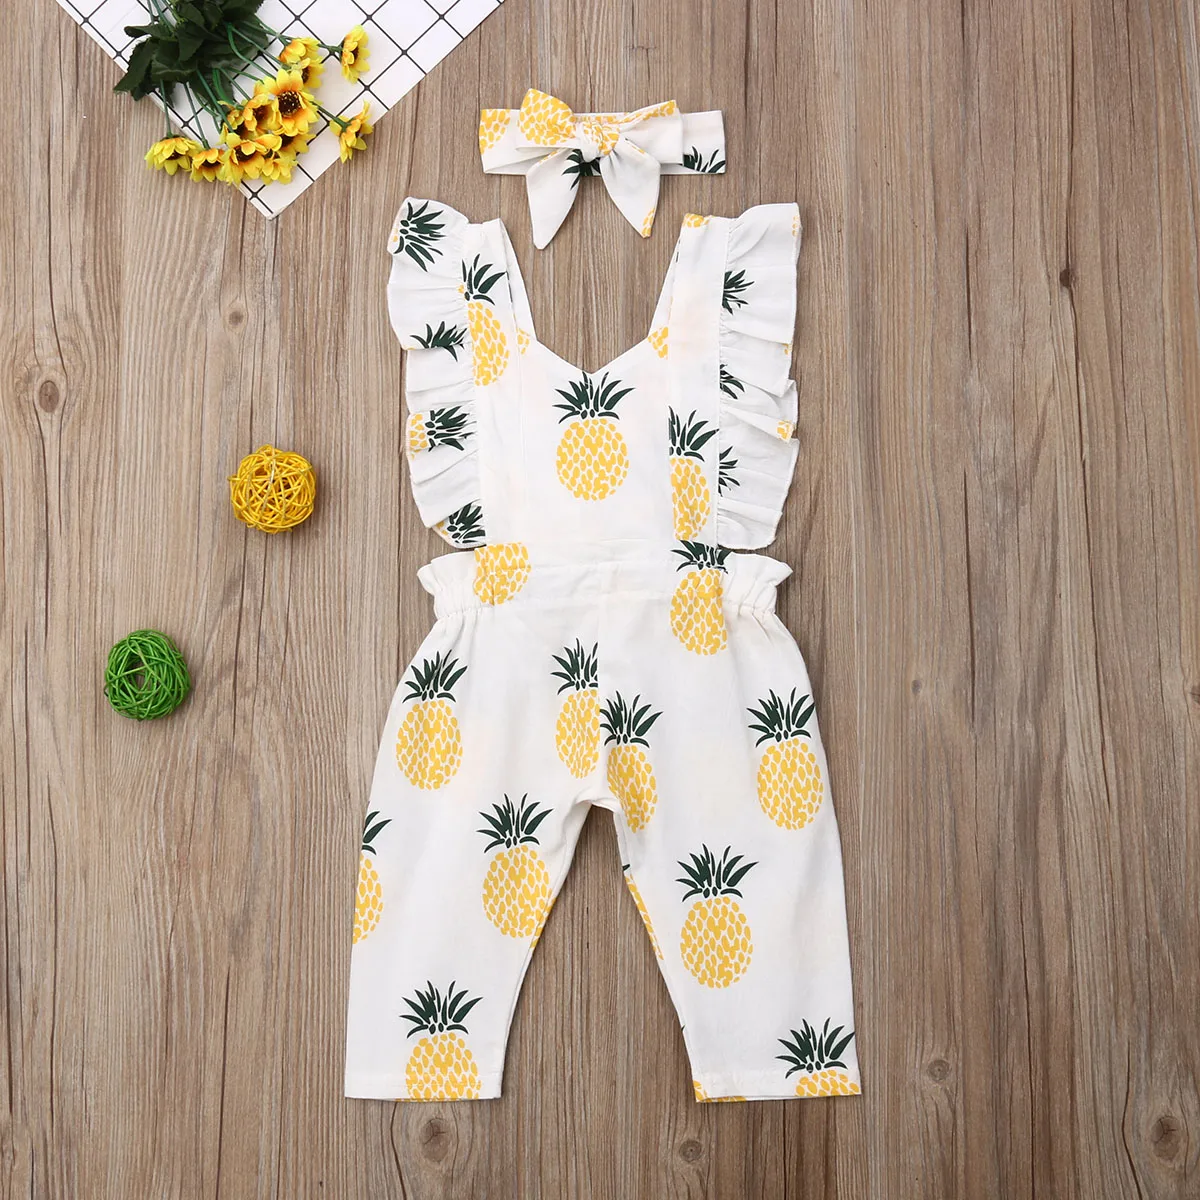 

Emmababy Newborn Baby Girl Clothes Sleevless Ruffle Pineapple Print Romper Jumpsuit Headband 2Pcs Outfits Baby Summer Clothing